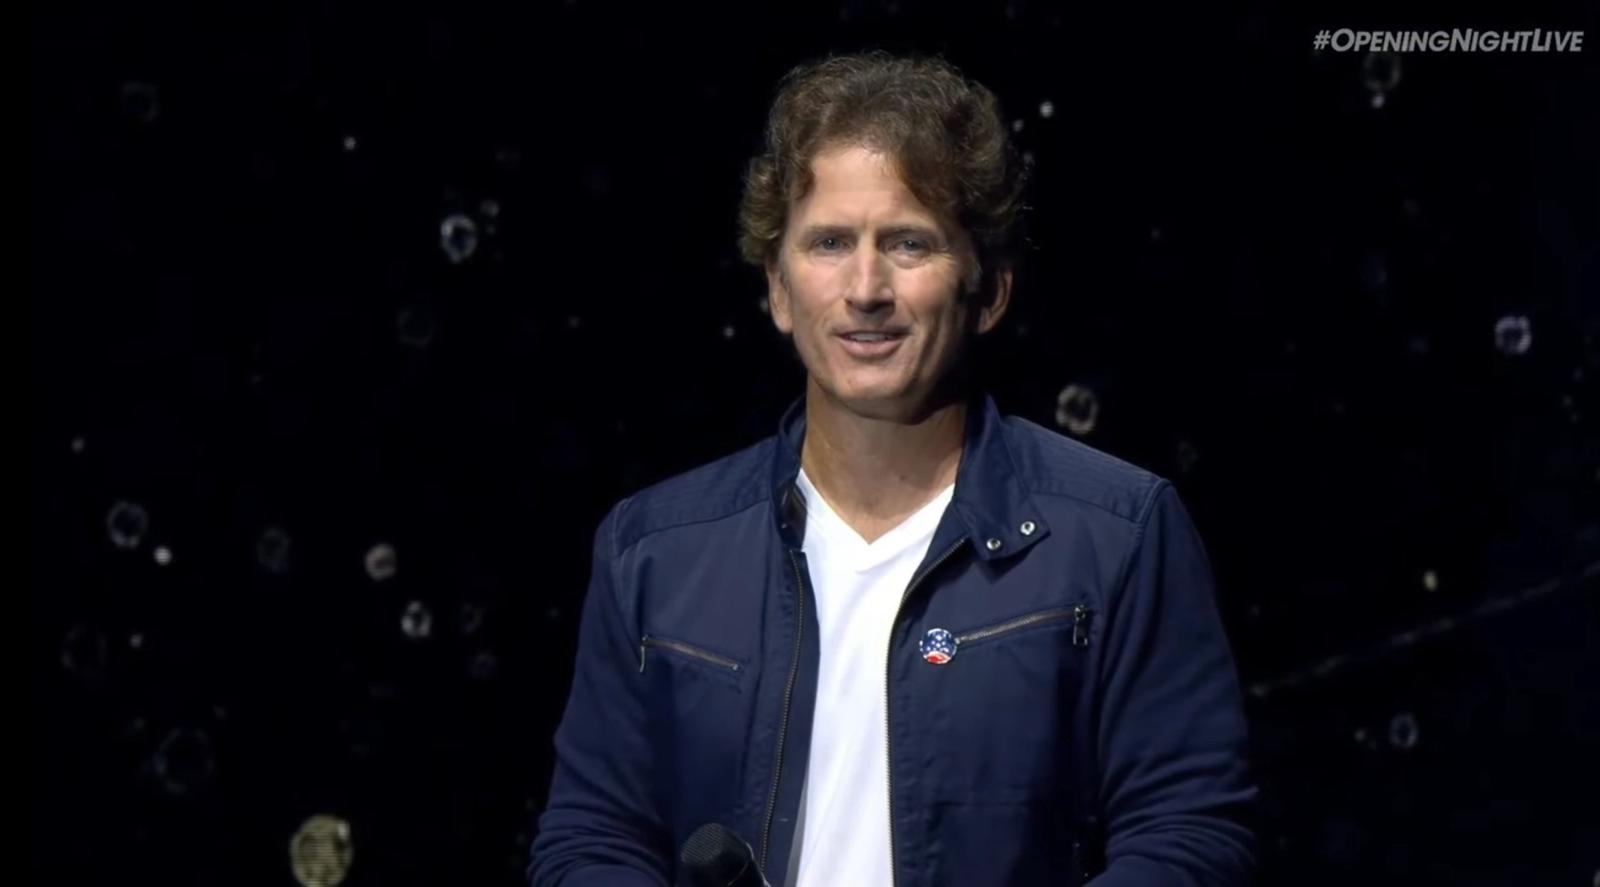 Todd Howard on stage at gamescom 2023